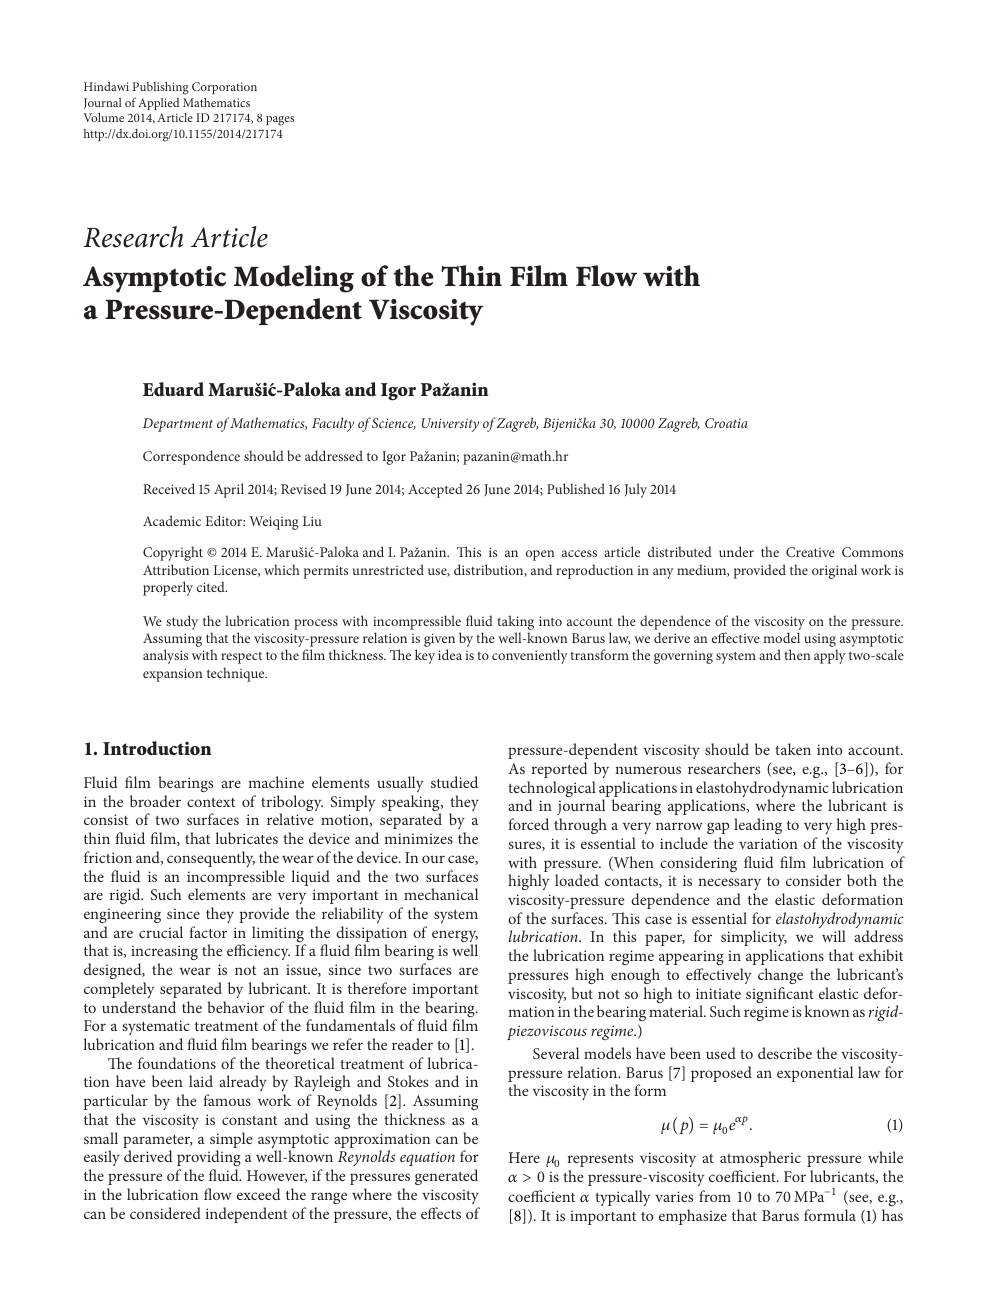 Asymptotic Modeling Of The Thin Film Flow With A Pressure Dependent Viscosity Topic Of Research Paper In Mathematics Download Scholarly Article Pdf And Read For Free On Cyberleninka Open Science Hub